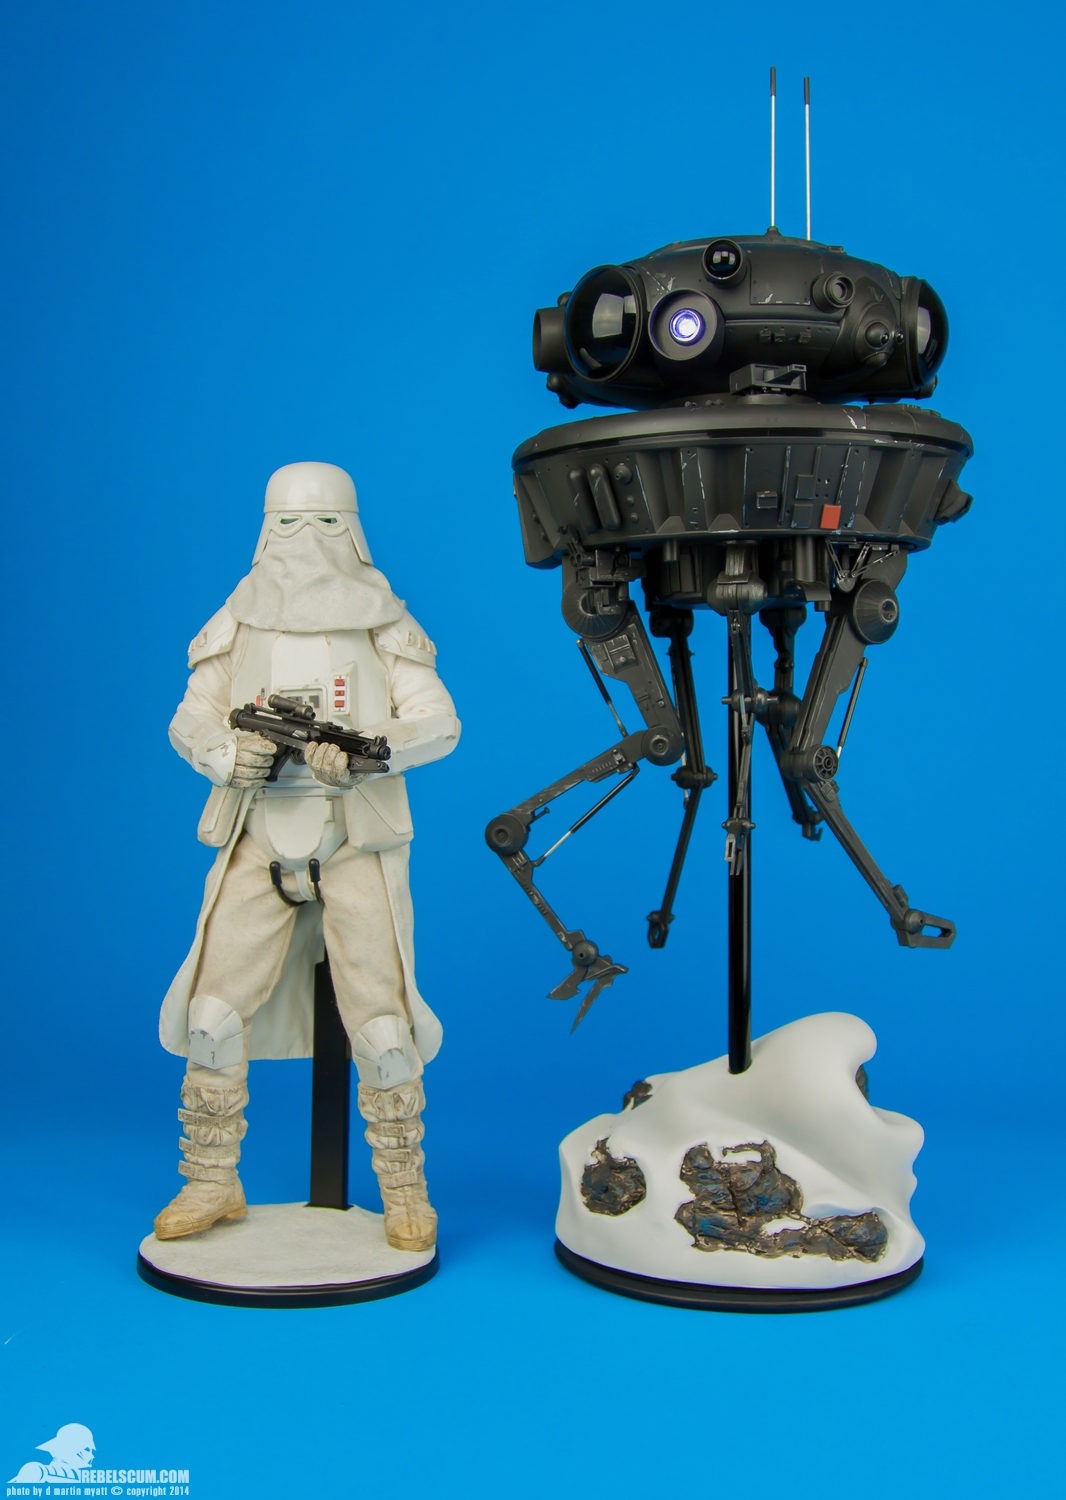 Imperial-Probe-Droid-Sixth-Scale-Sideshow-Collectibles-026.jpg